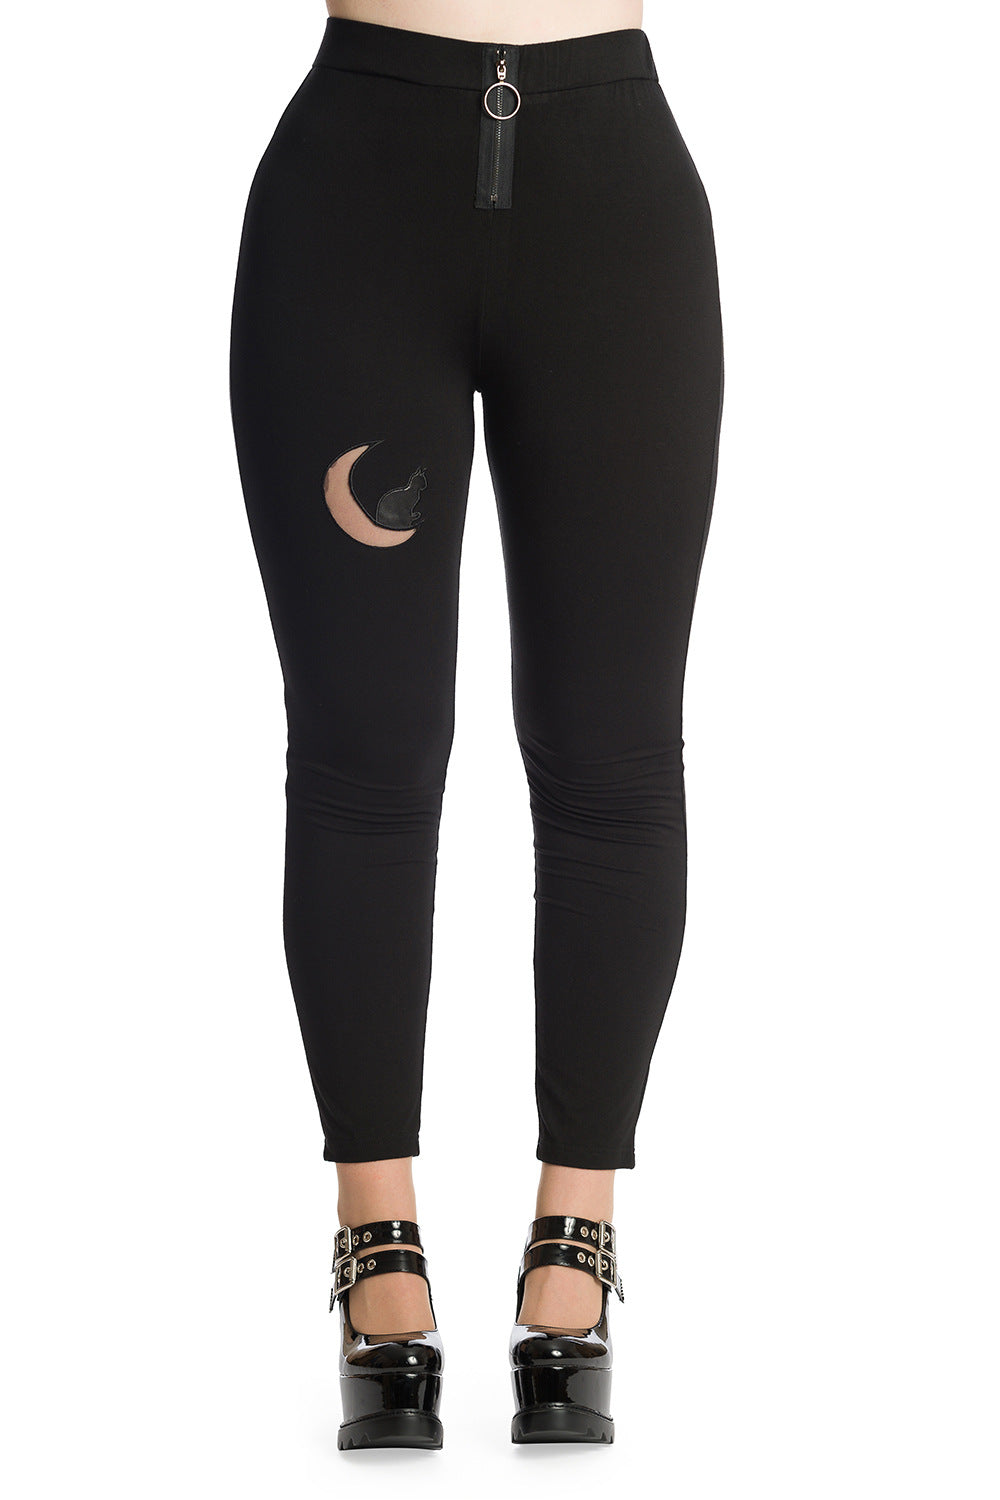 High waist black leggings with mesh moon and cat on one leg 